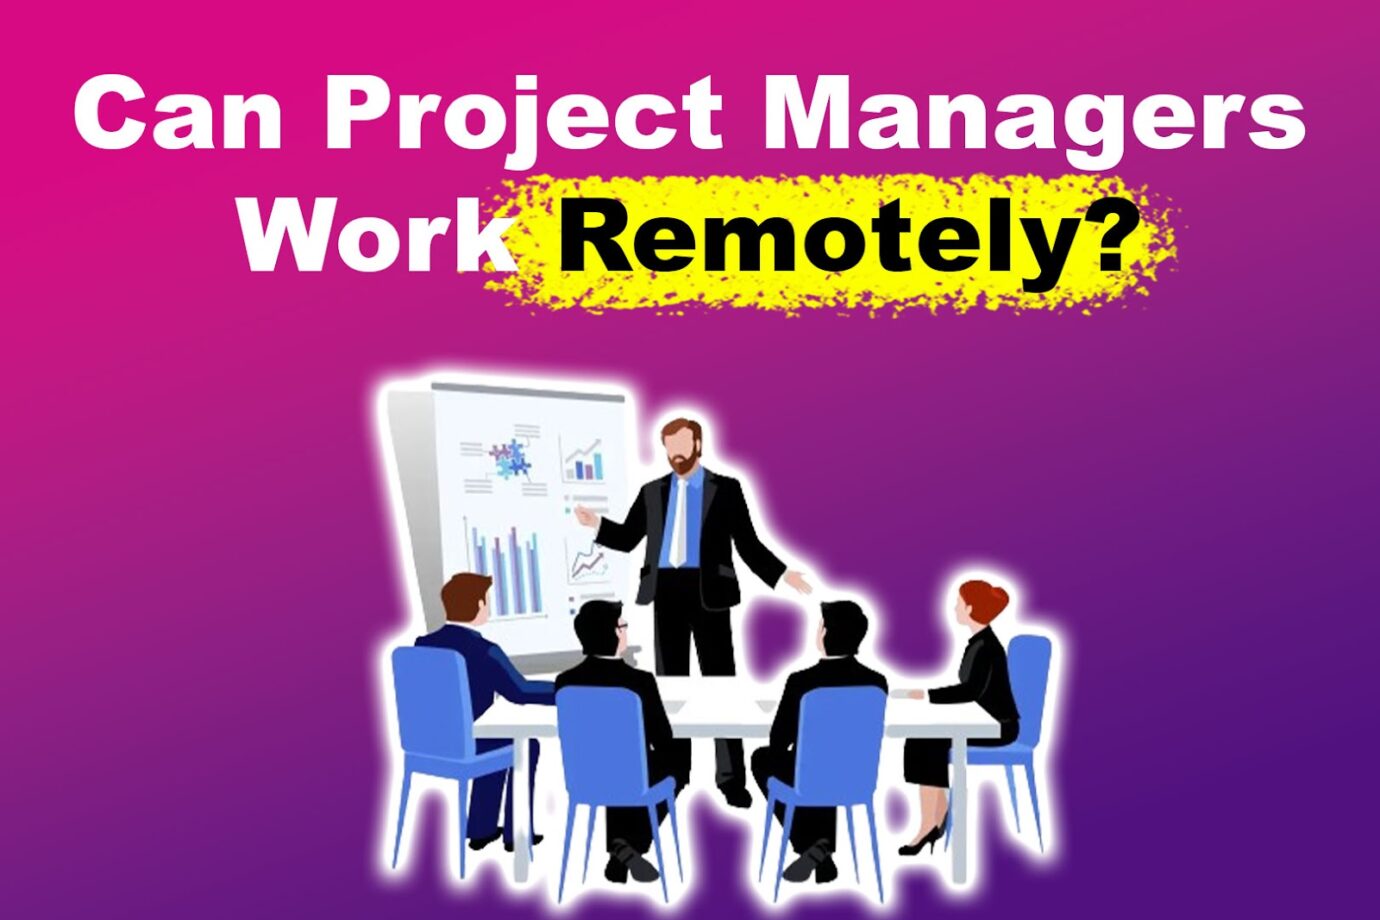 Can Project Managers Work Remotely